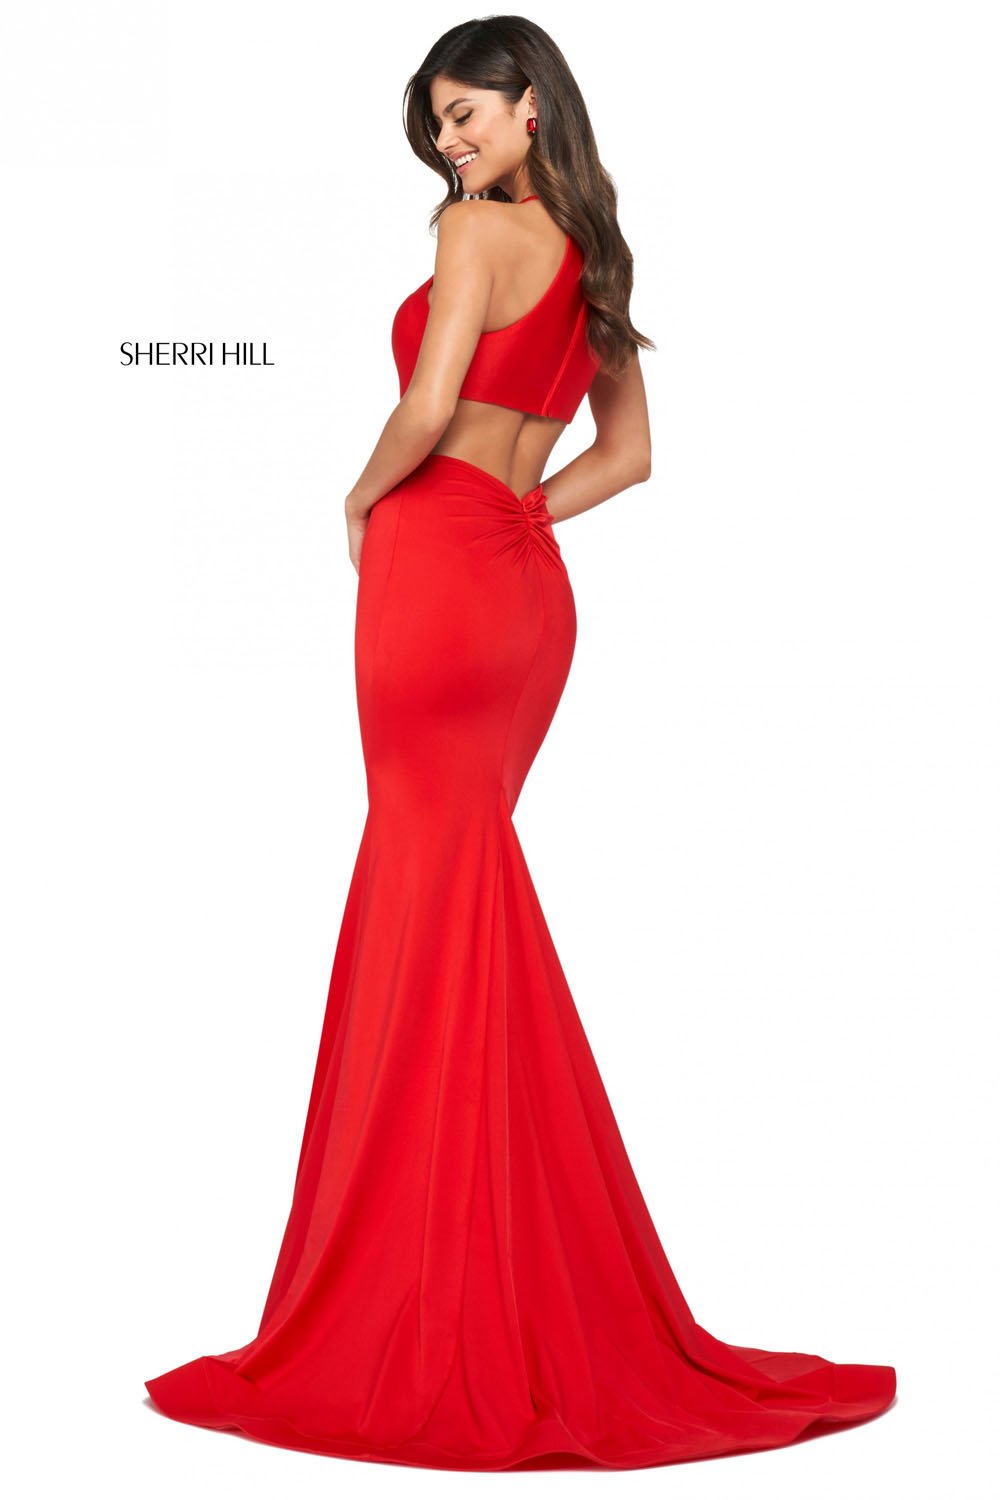 Sherri Hill 53663 dress images in these colors: Black, Red, Dark Coral, Royal, Turquoise, Blush, Light Blue, Yellow, Emerald, Ruby, Coral, Navy, Fuchsia, Dark Periwinkle.